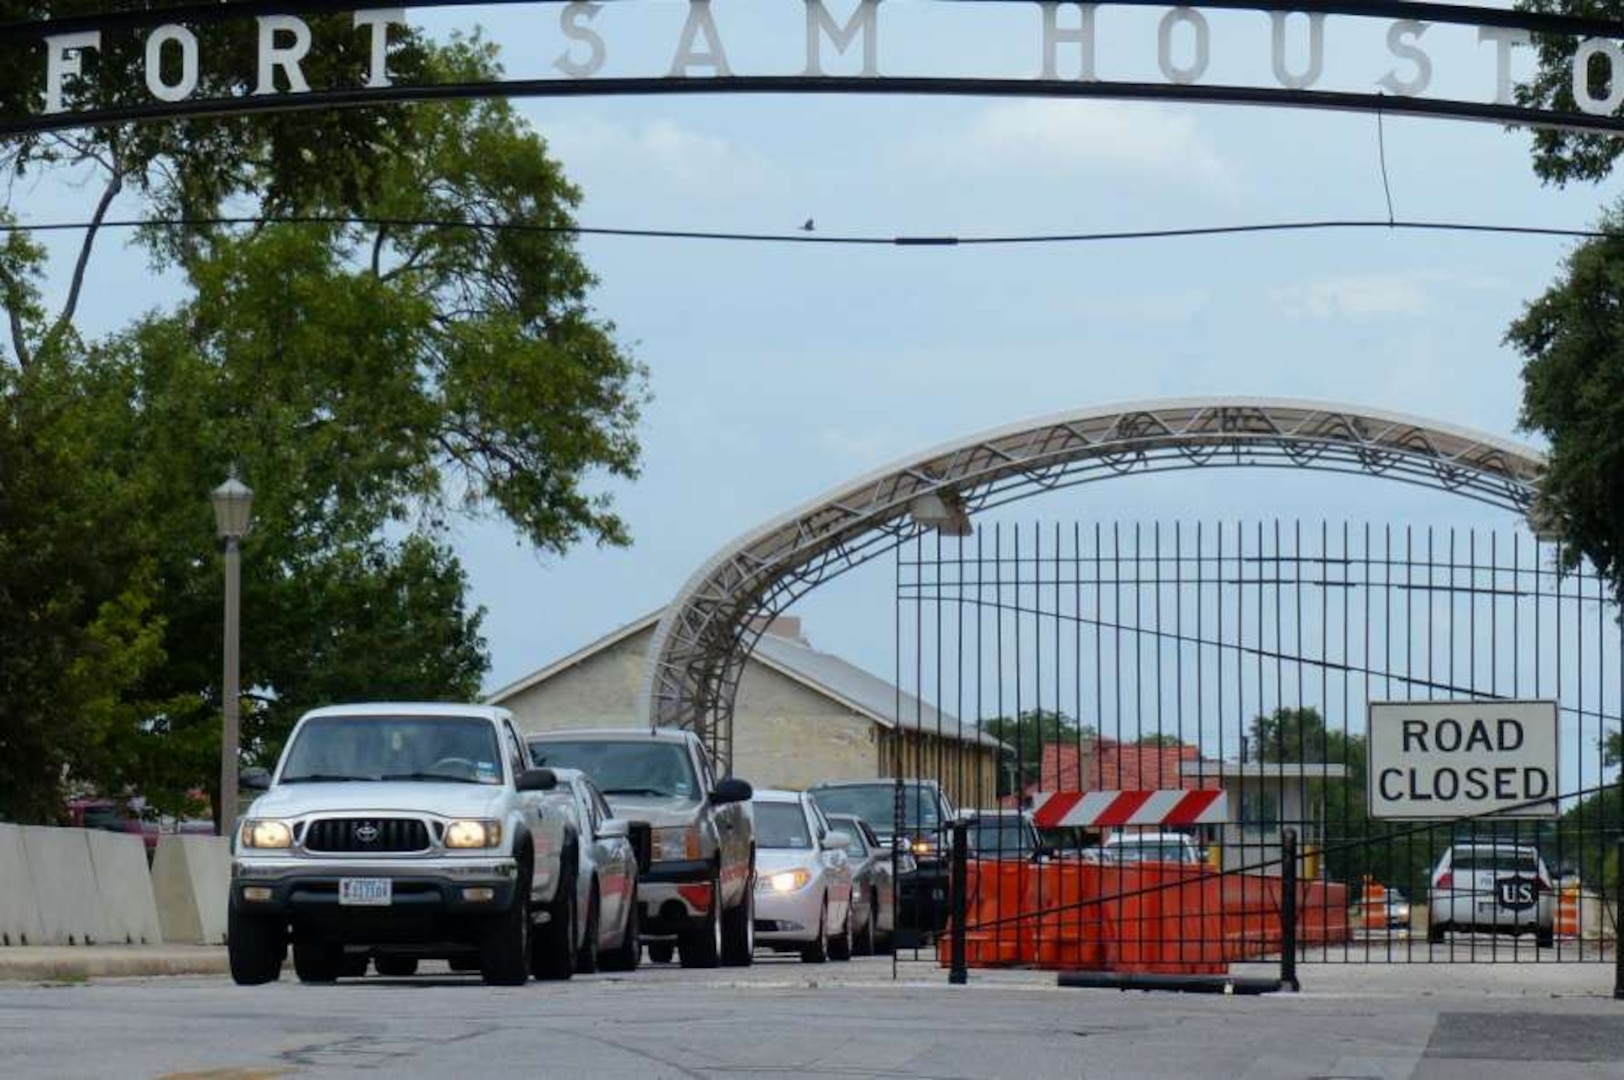 Beginning Jan. 22, major changes will occur at two gates used to access the west side of Joint Base San Antonio-Fort Sam Houston.